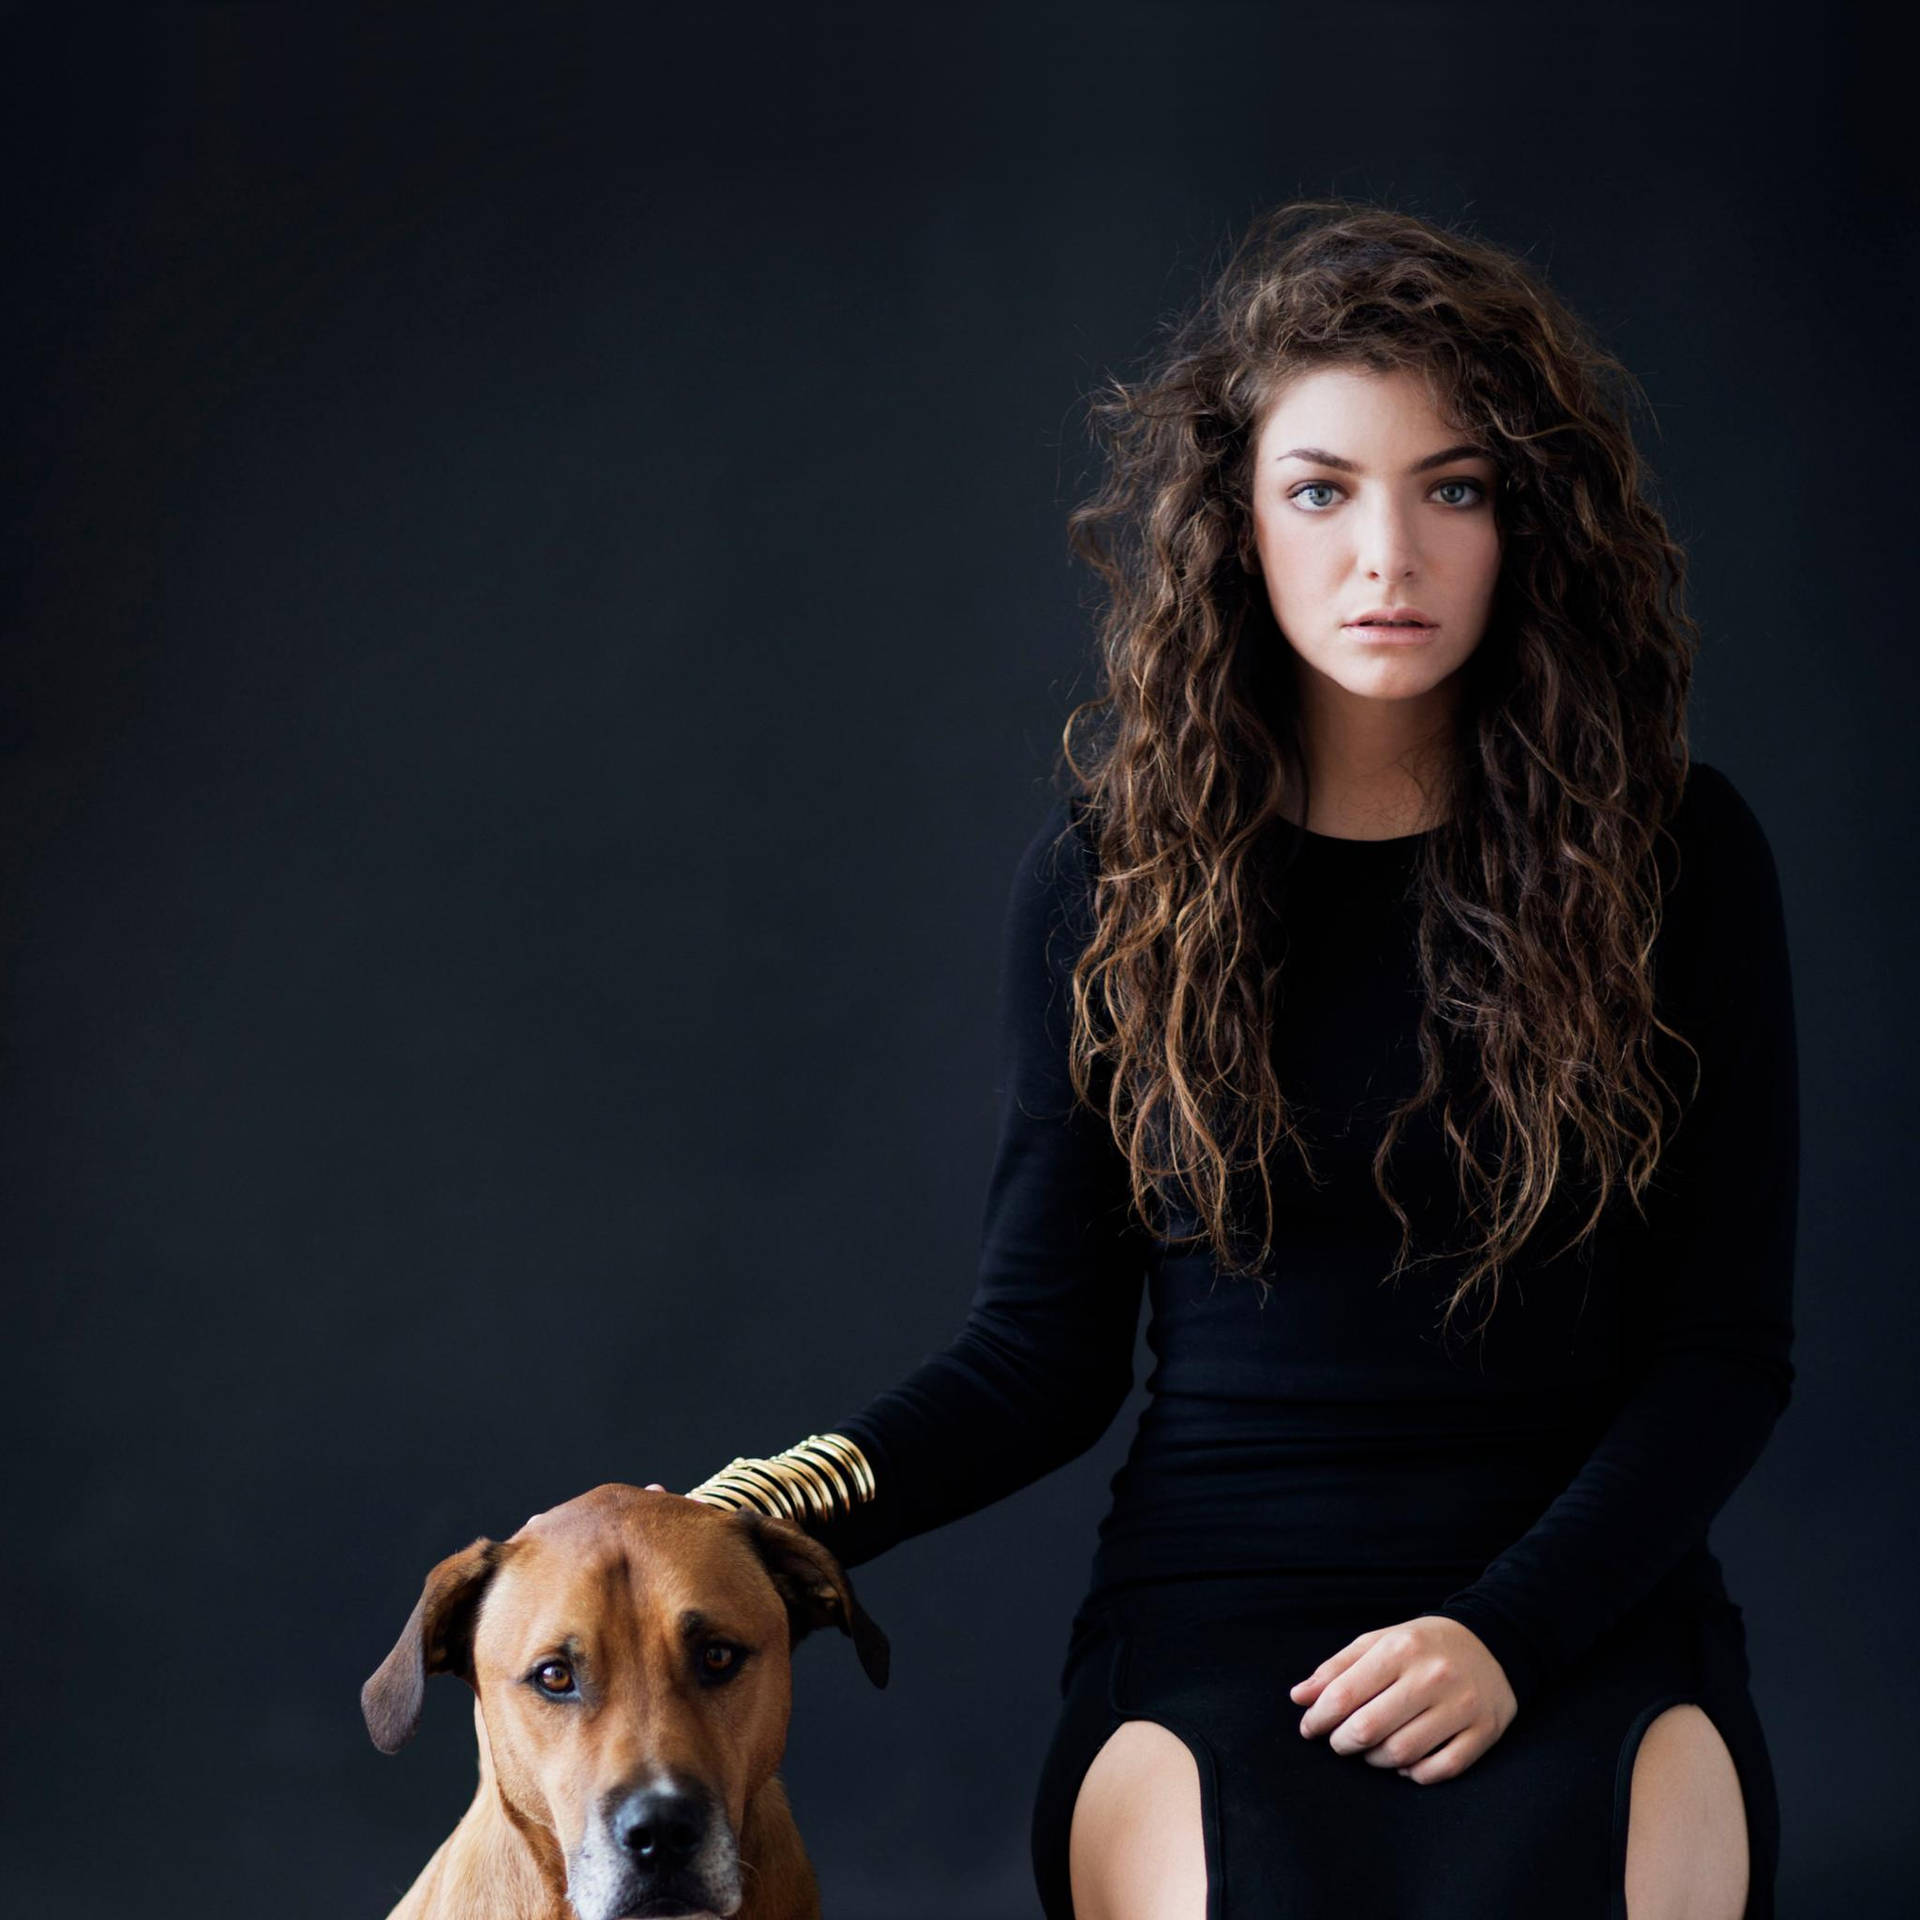 Lorde Pure Heroine With Dog Wallpaper